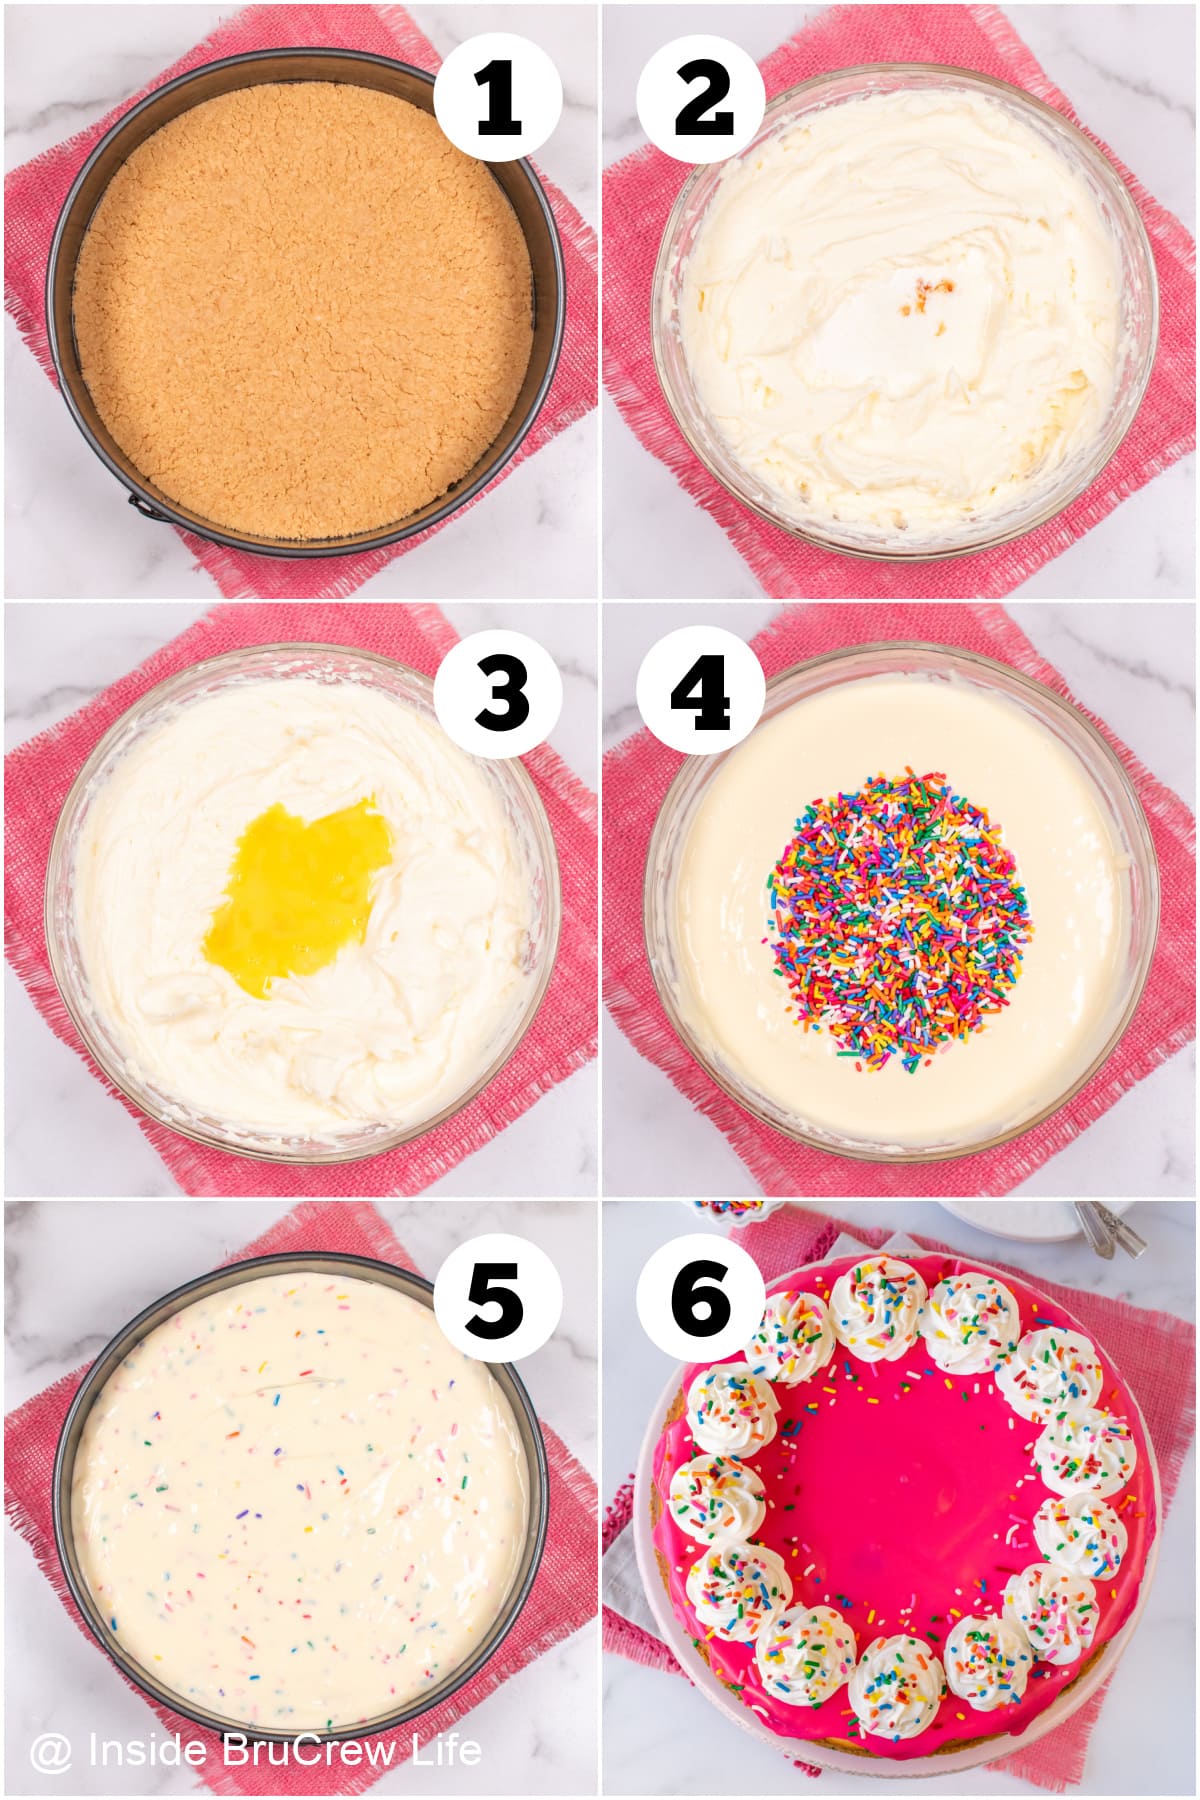 Six pictures collaged together showing how to make a sprinkle cheesecake.